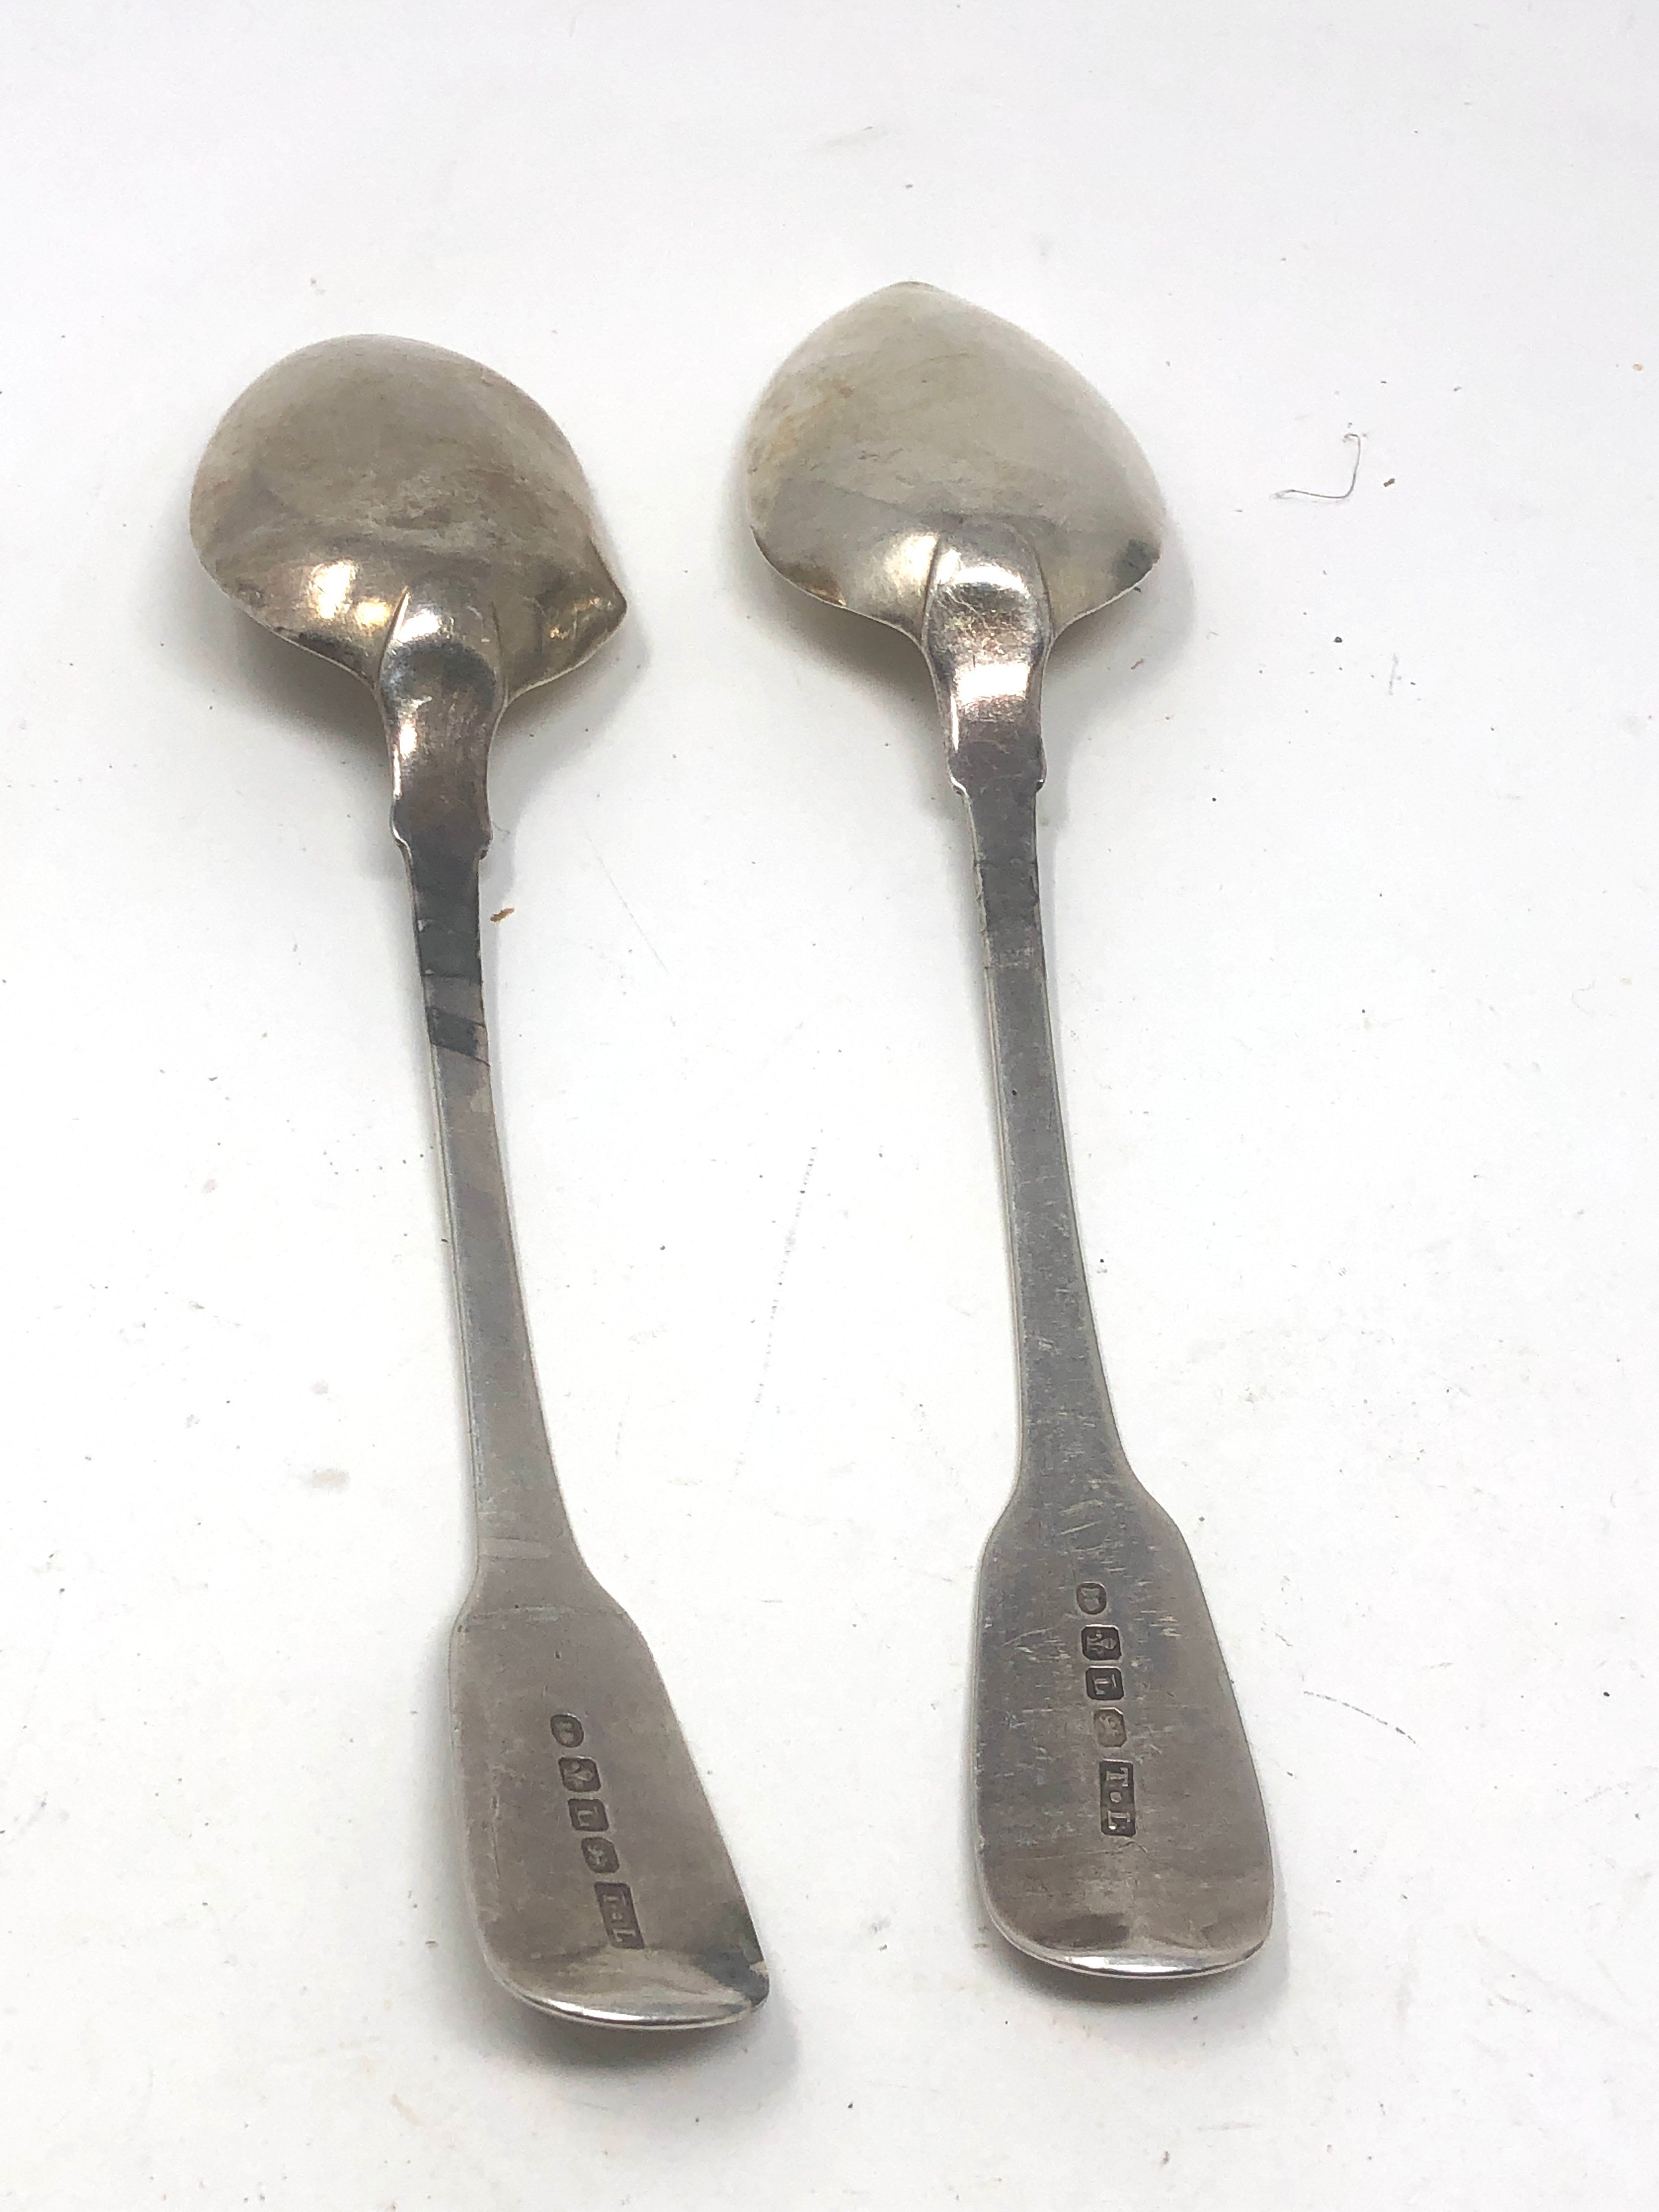 2 georgian silver serving spoons - Image 2 of 3